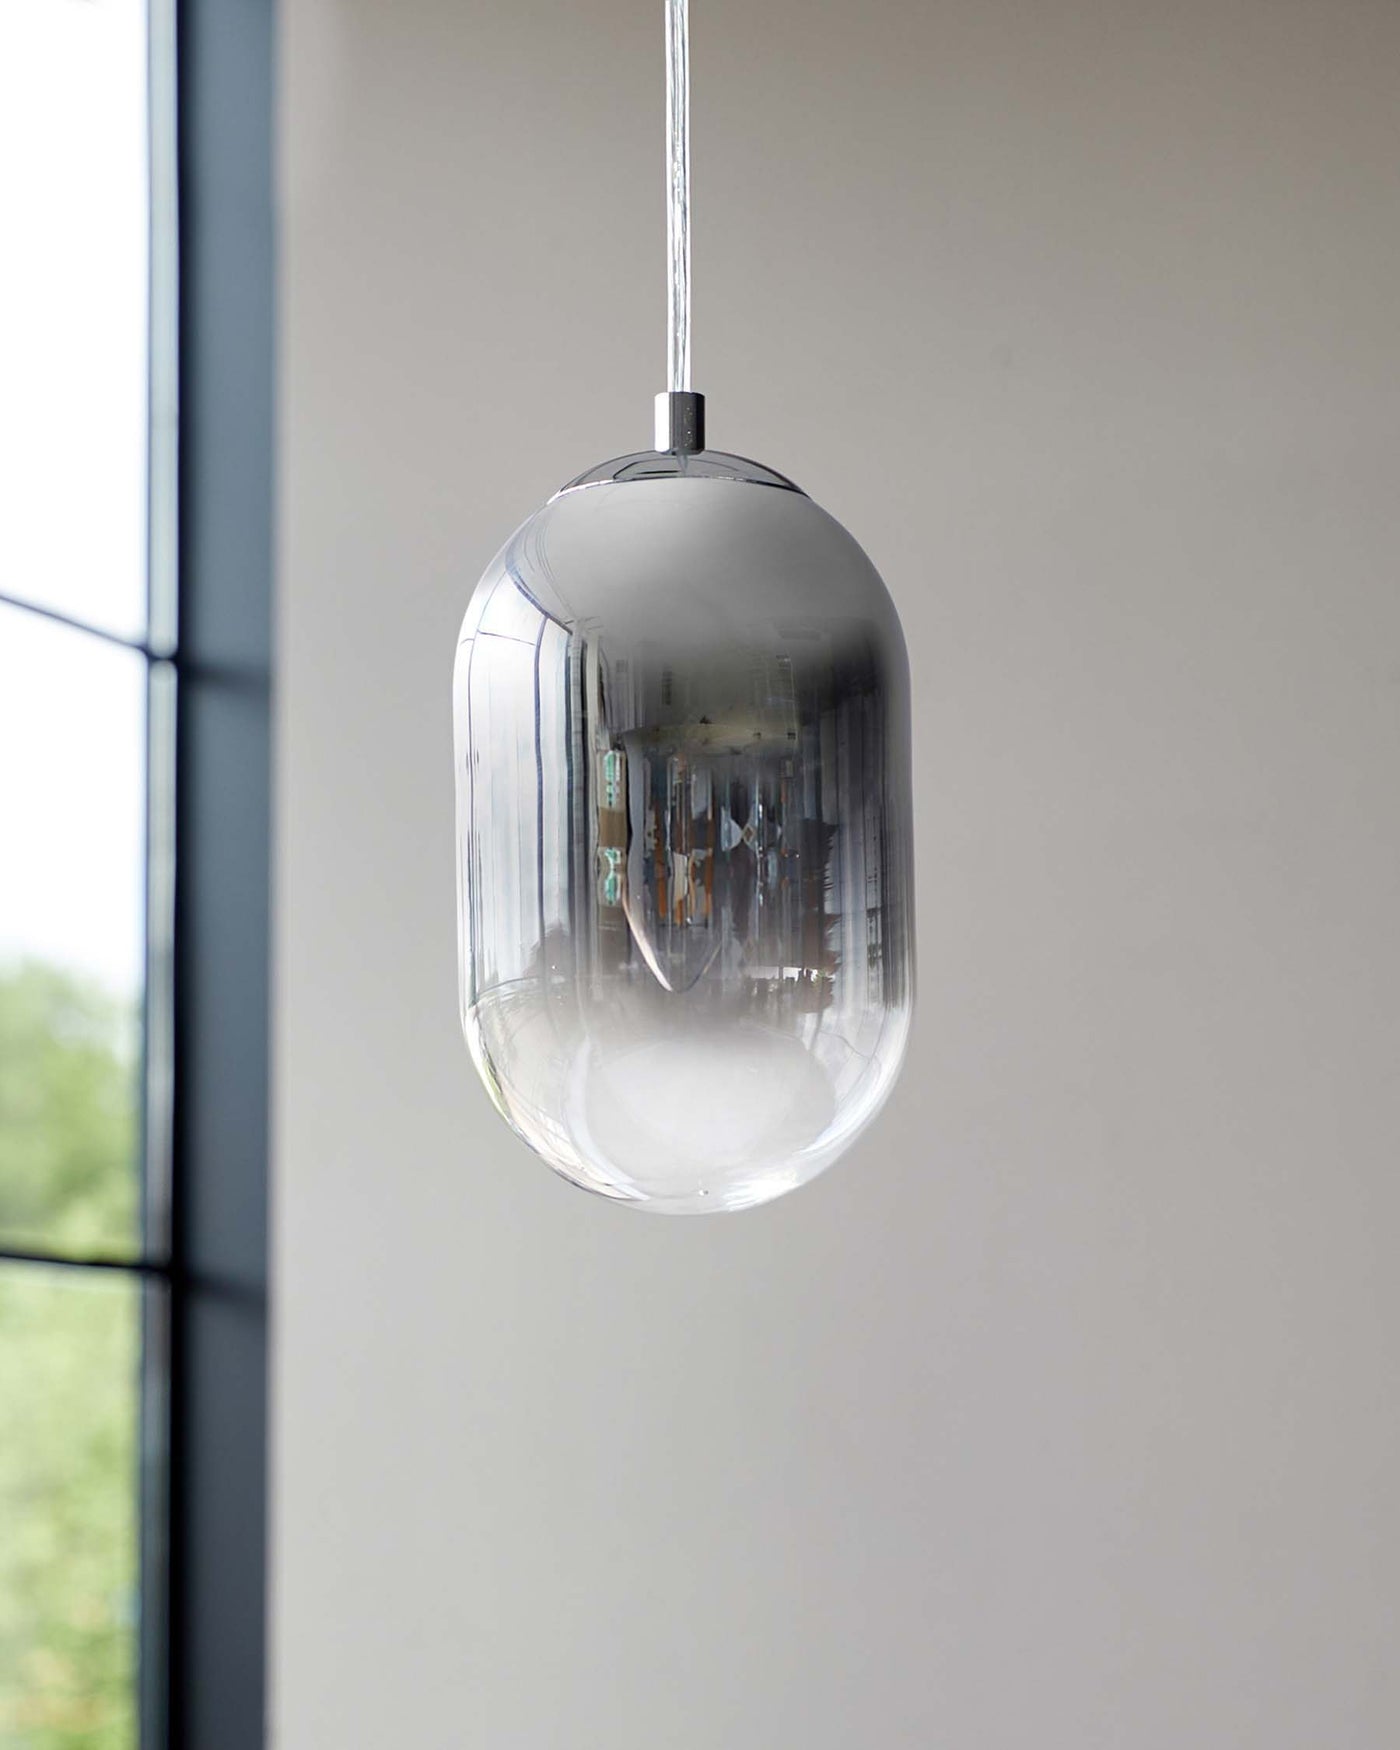 Modern clear glass pendant light with sleek metal fixtures, suspended by a wire against a soft white backdrop near a window with a view of greenery.